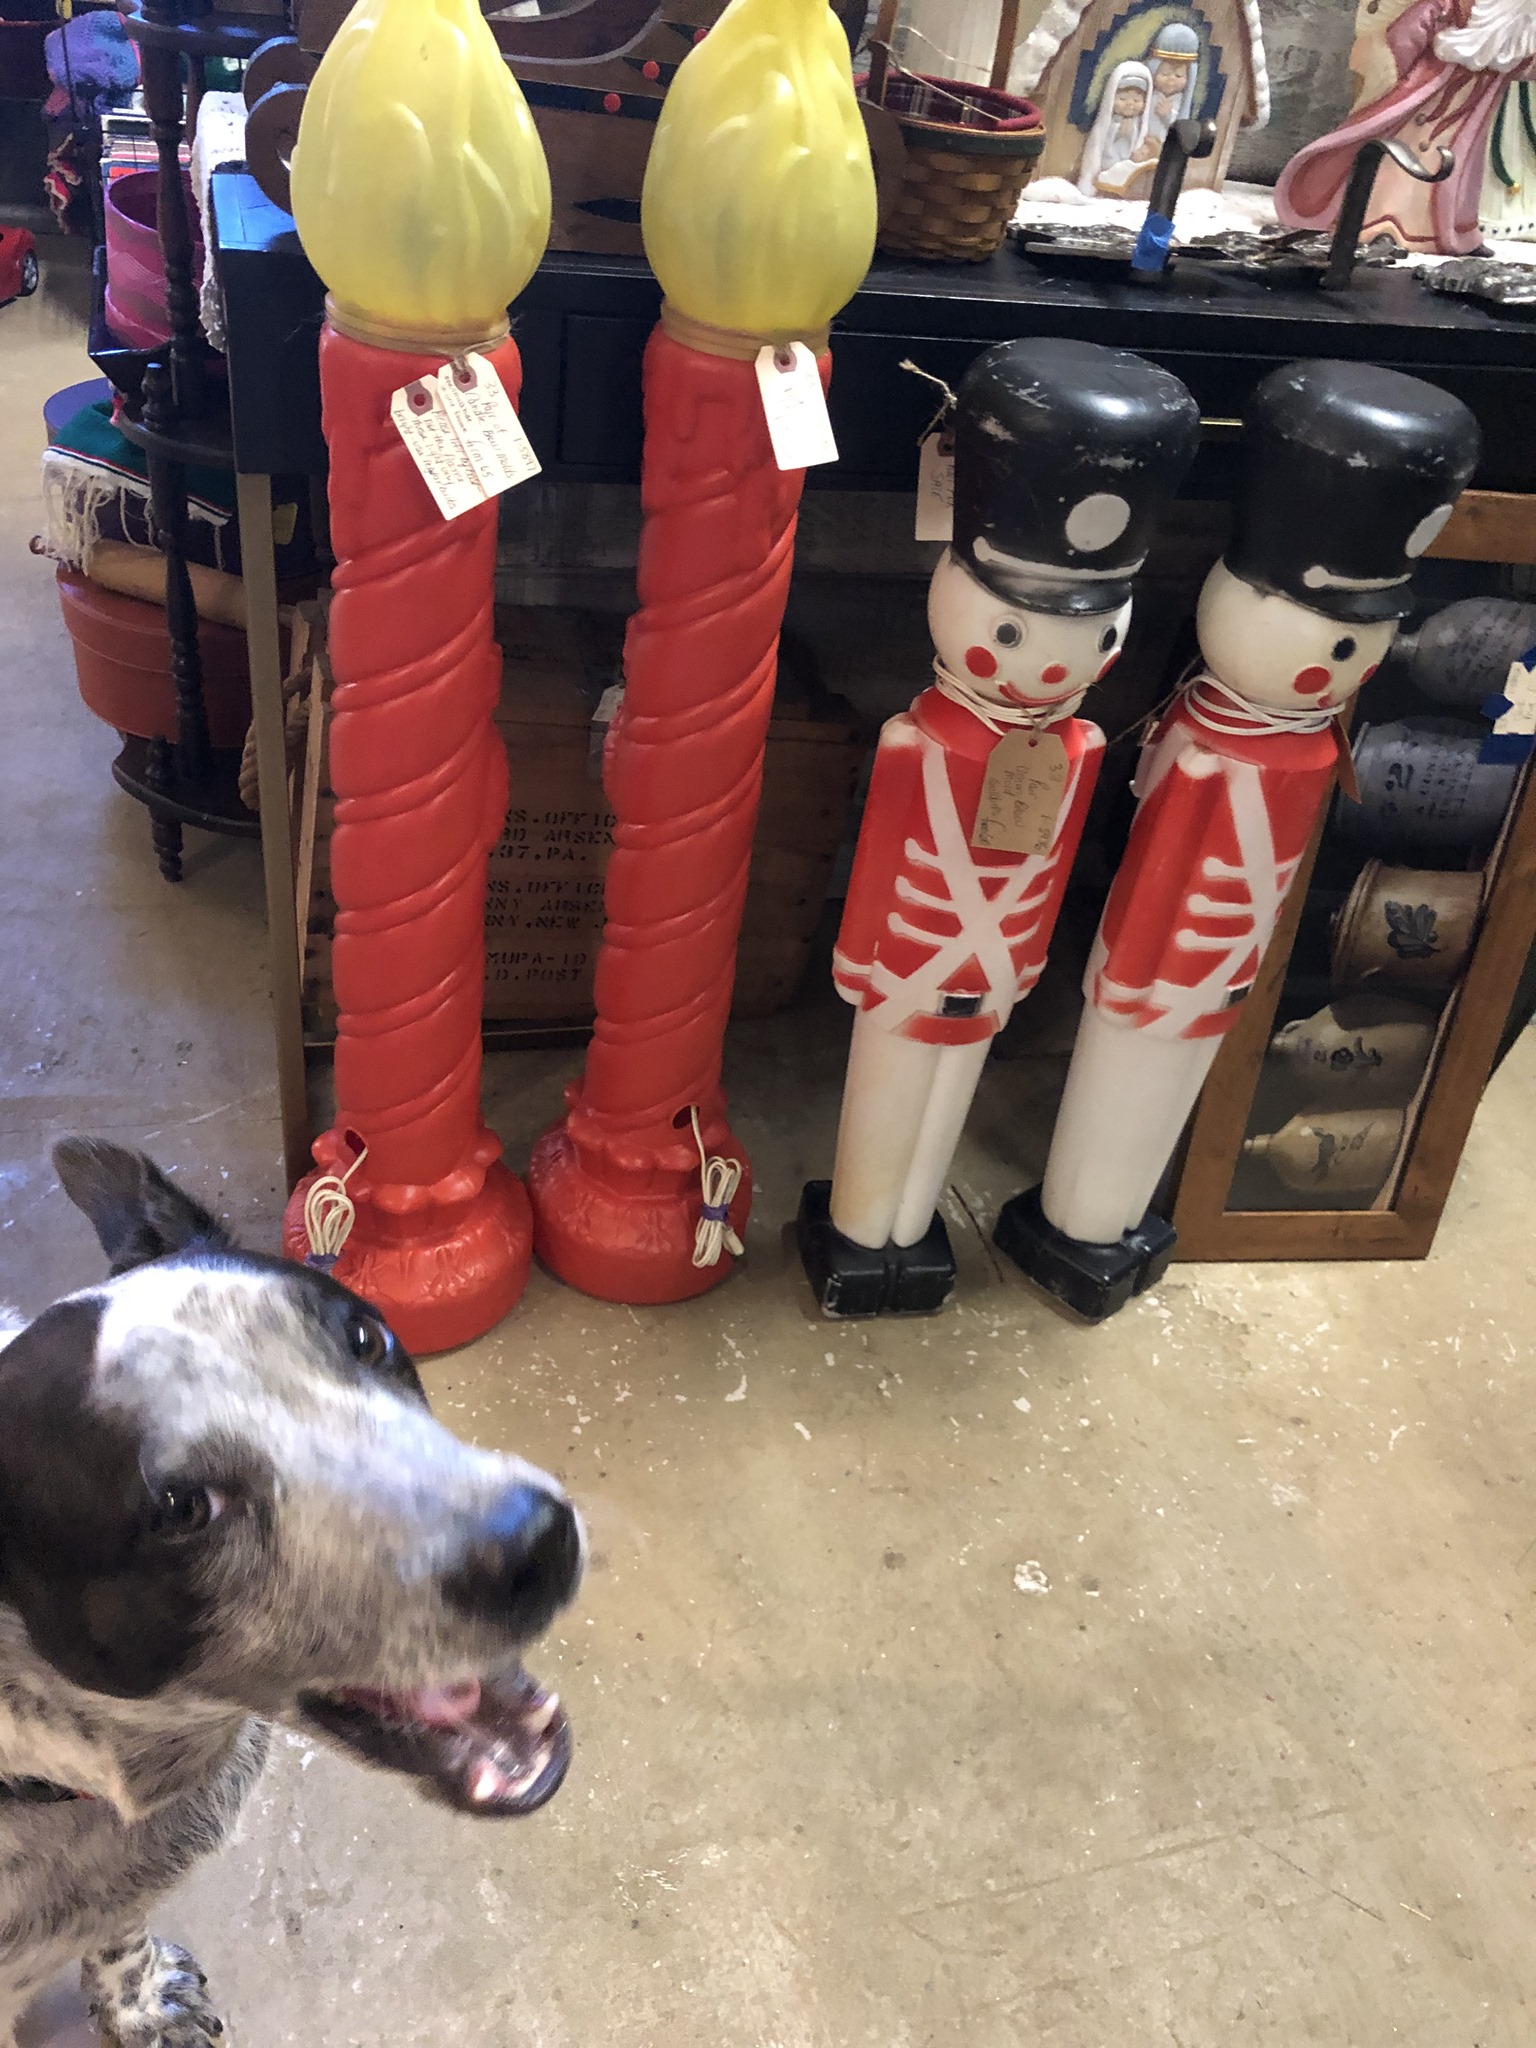 Scranberry Coop Snapshots - Tosh says "whoa, look at all these BALLS!" - Scranberry Coop - Vintage Store - Antiques, Collectibles, & More